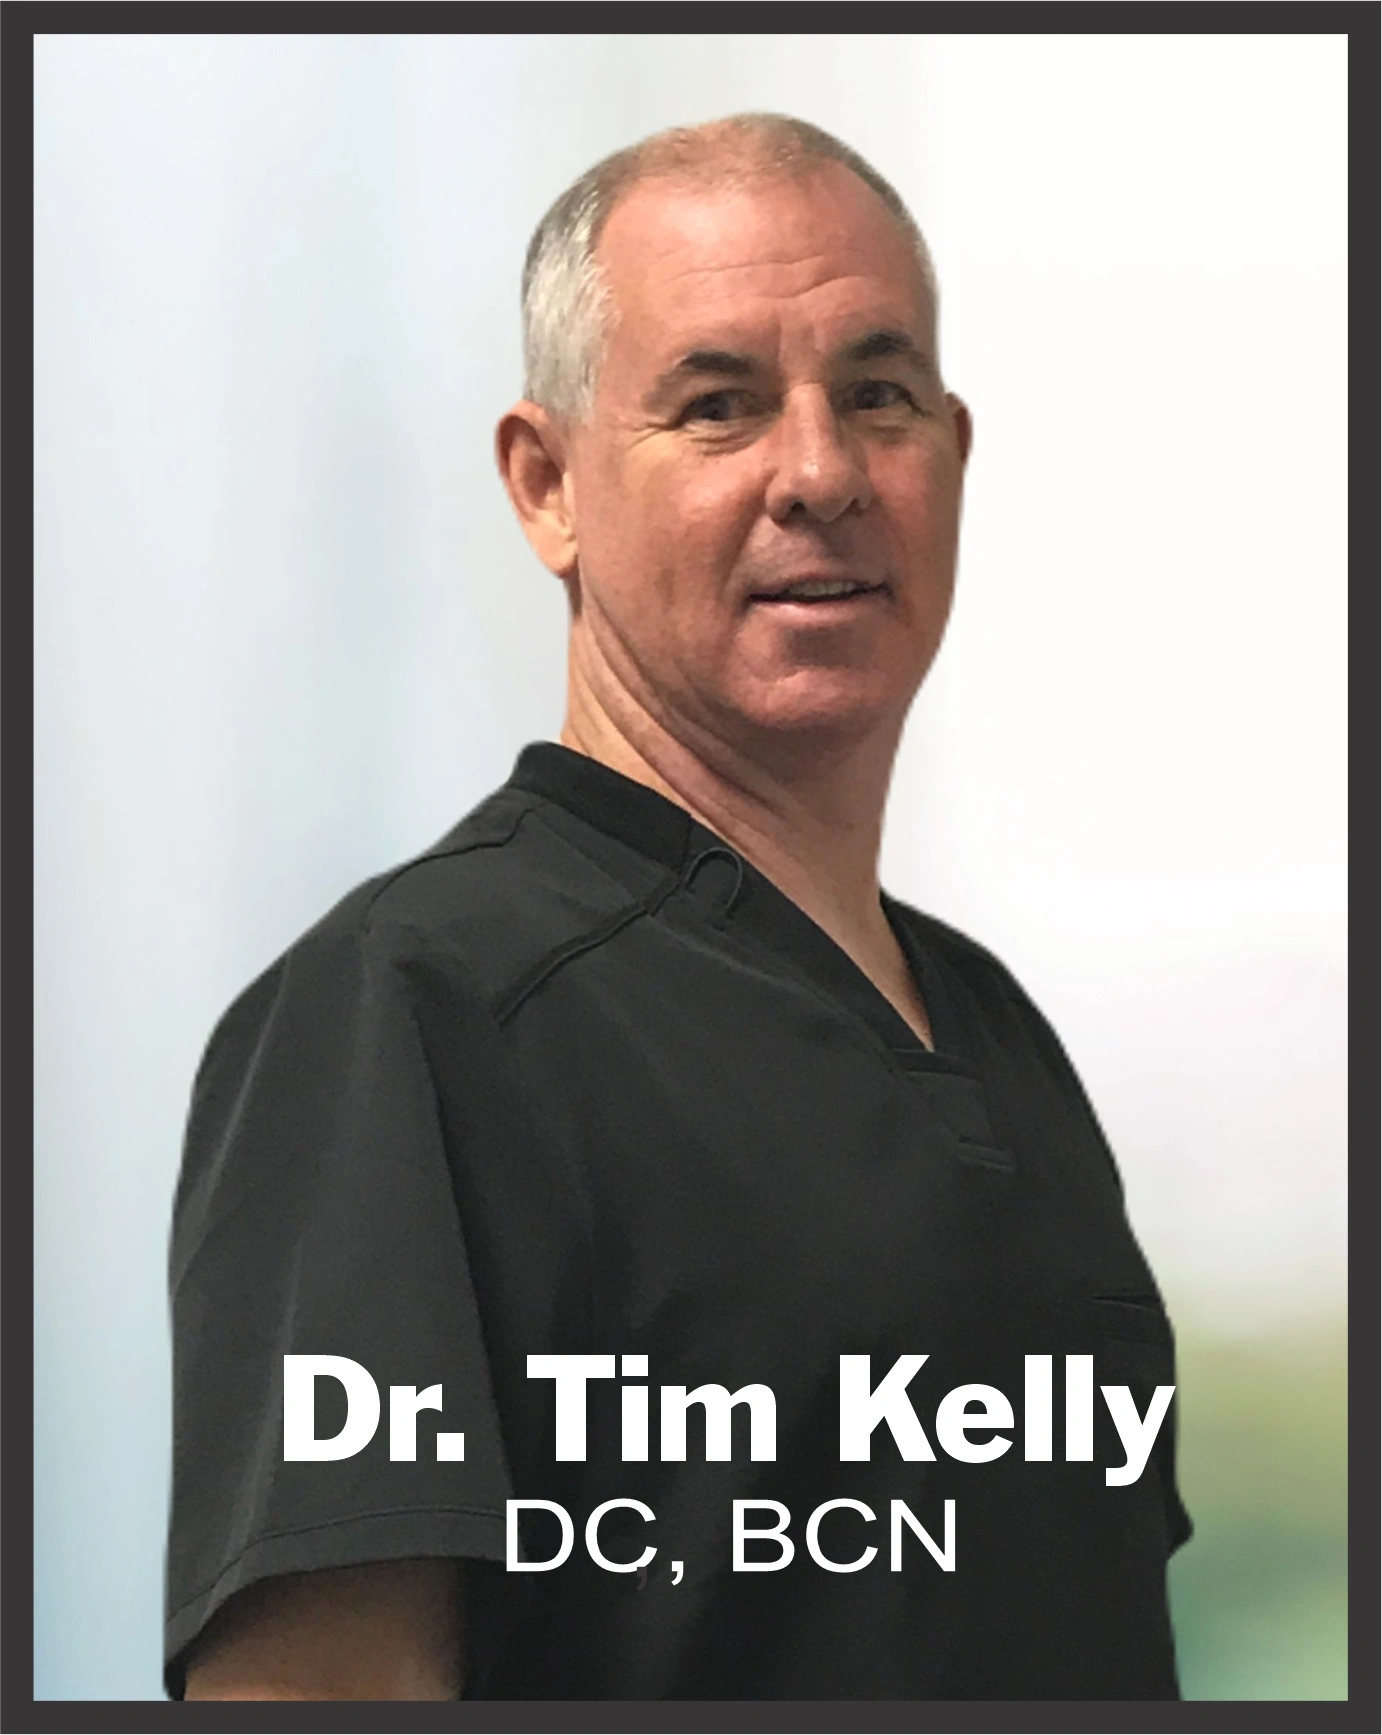 Call Dr. Kelly